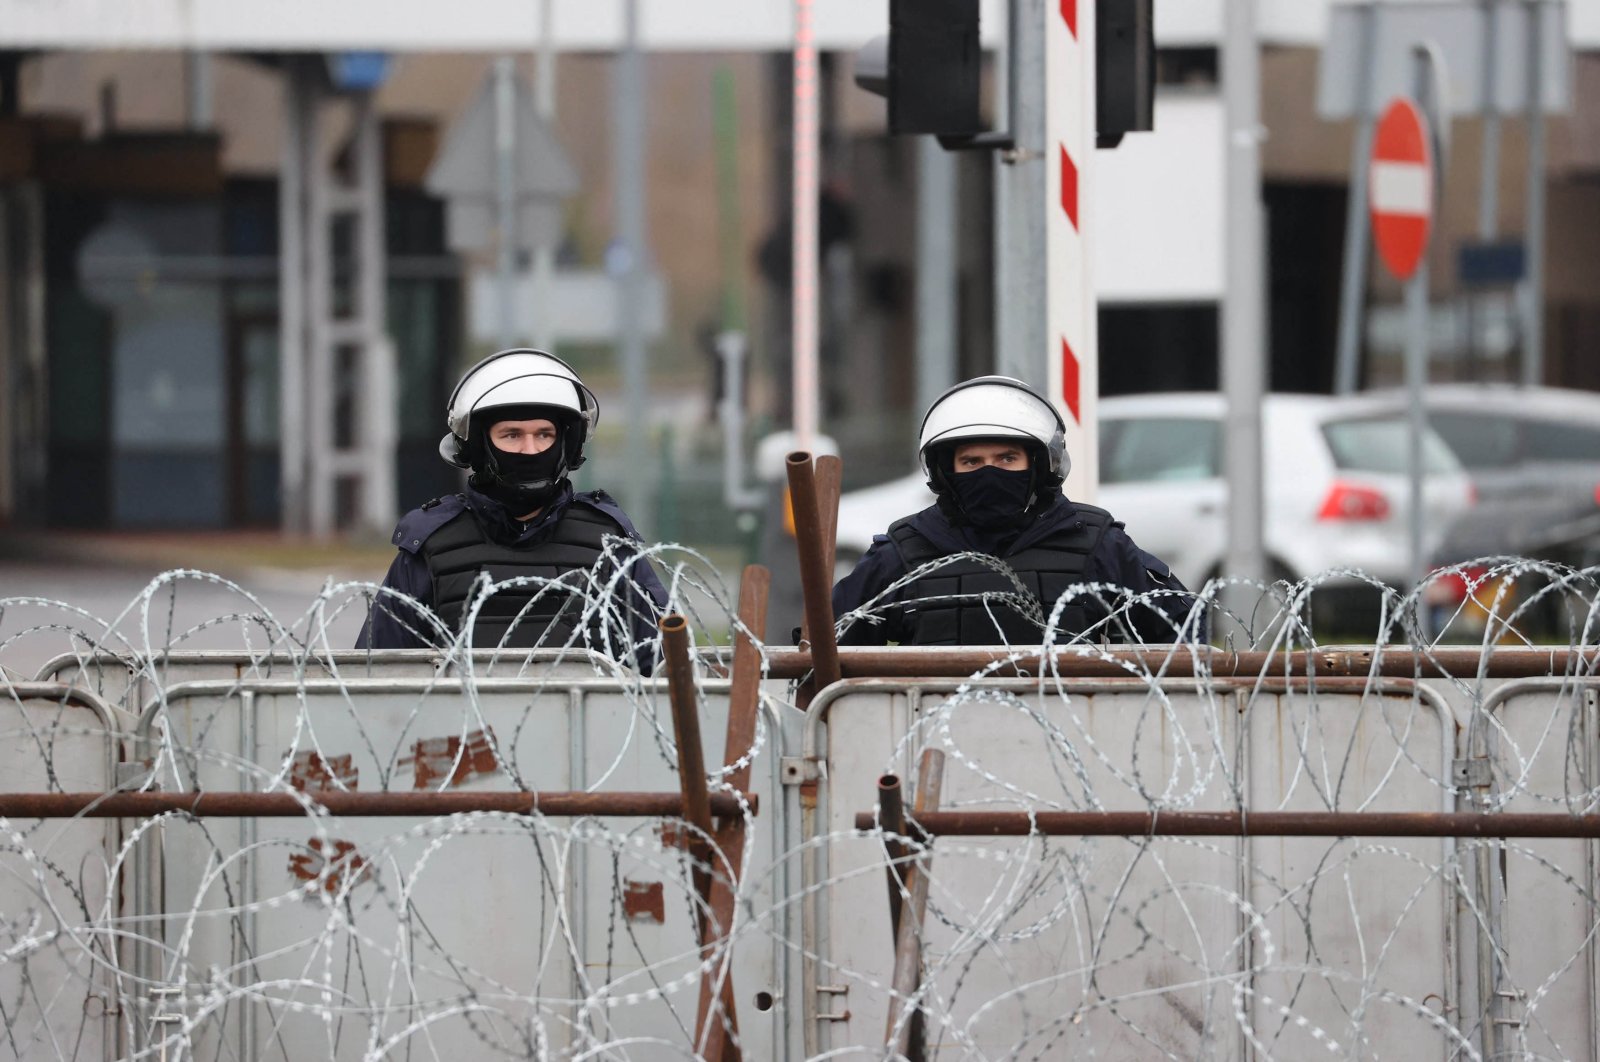 Polish law enforcement officers secure the frontier at the Bruzgi-Kuznica border crossing on the Belarusian-Polish border, Nov. 19, 2021. (AFP Photo)